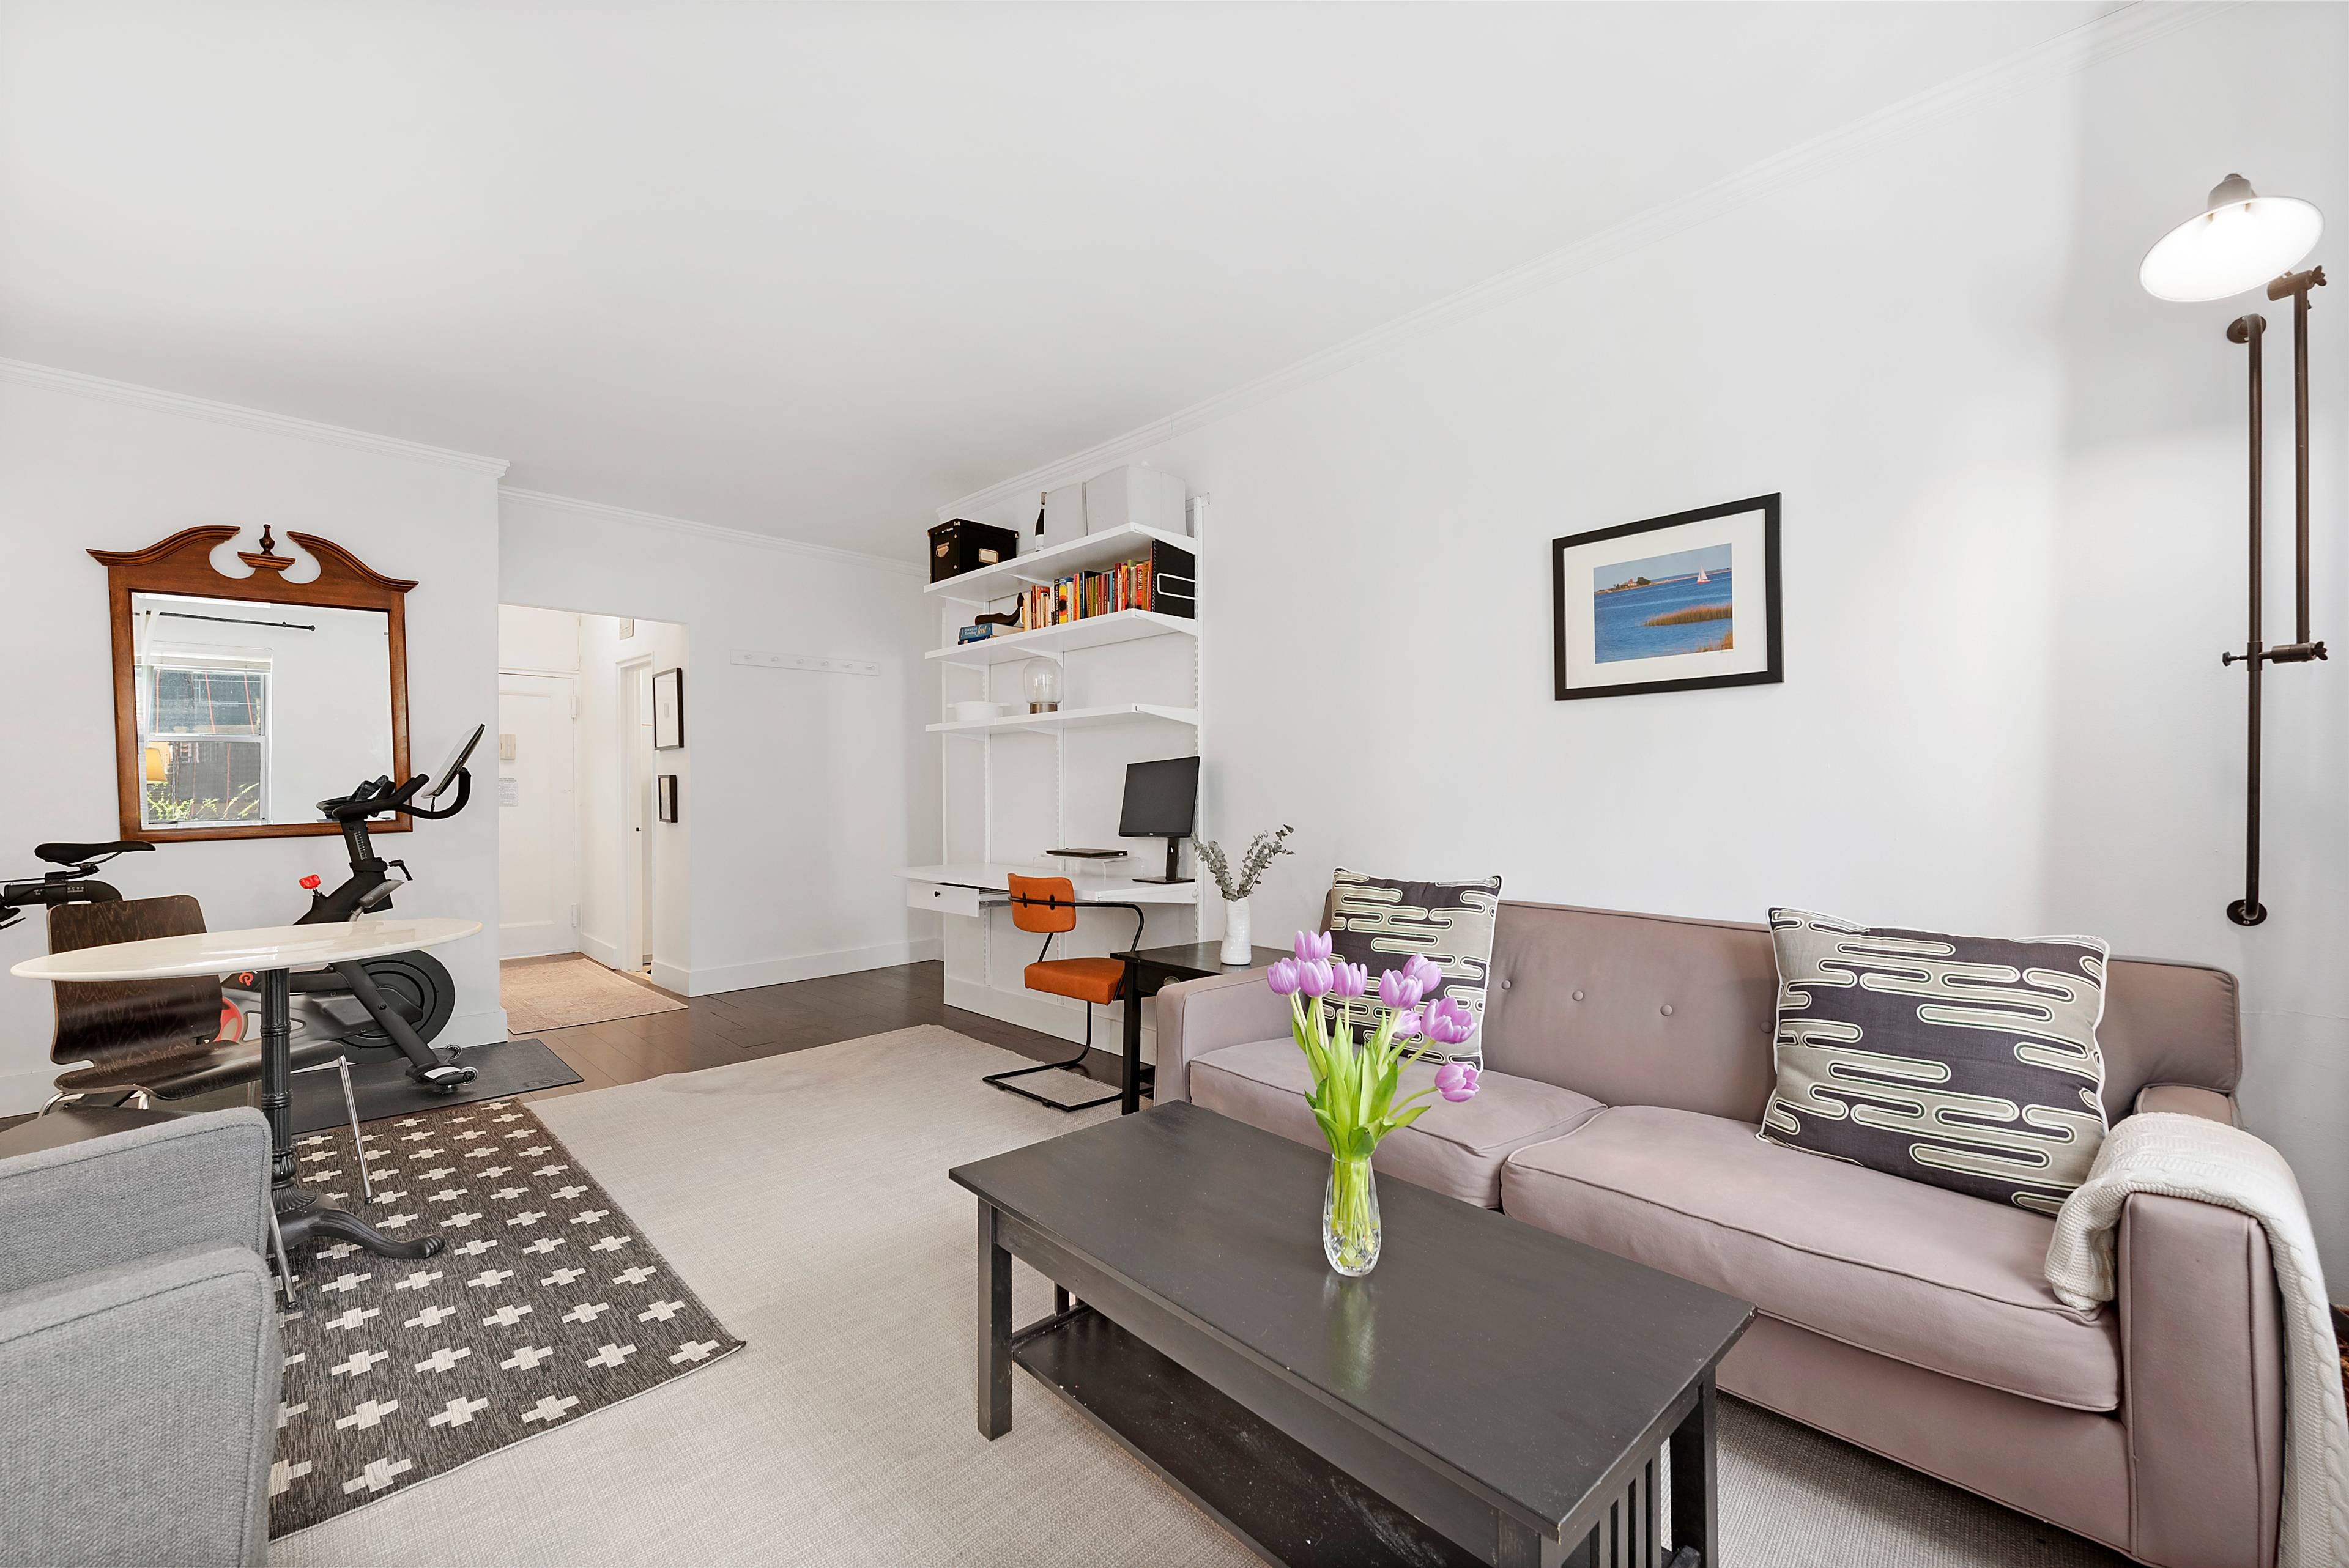 A quiet, spacious, and sunny 1 bedroom in the heart of the Upper East Side what more could you want.